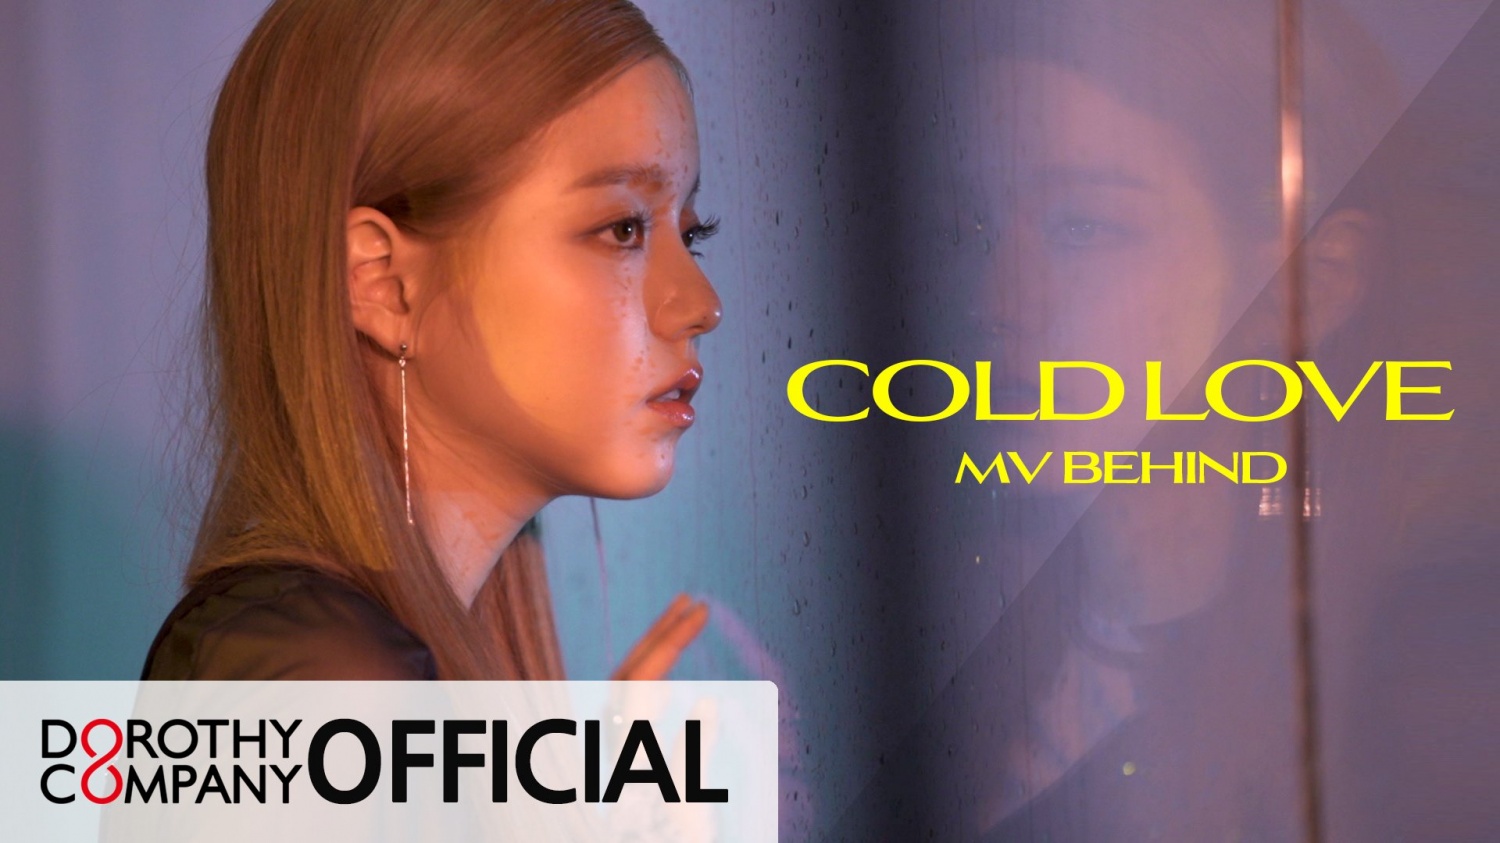 Rothy releases new song 'COLD LOVE'... Shin Seung Hun support shooting